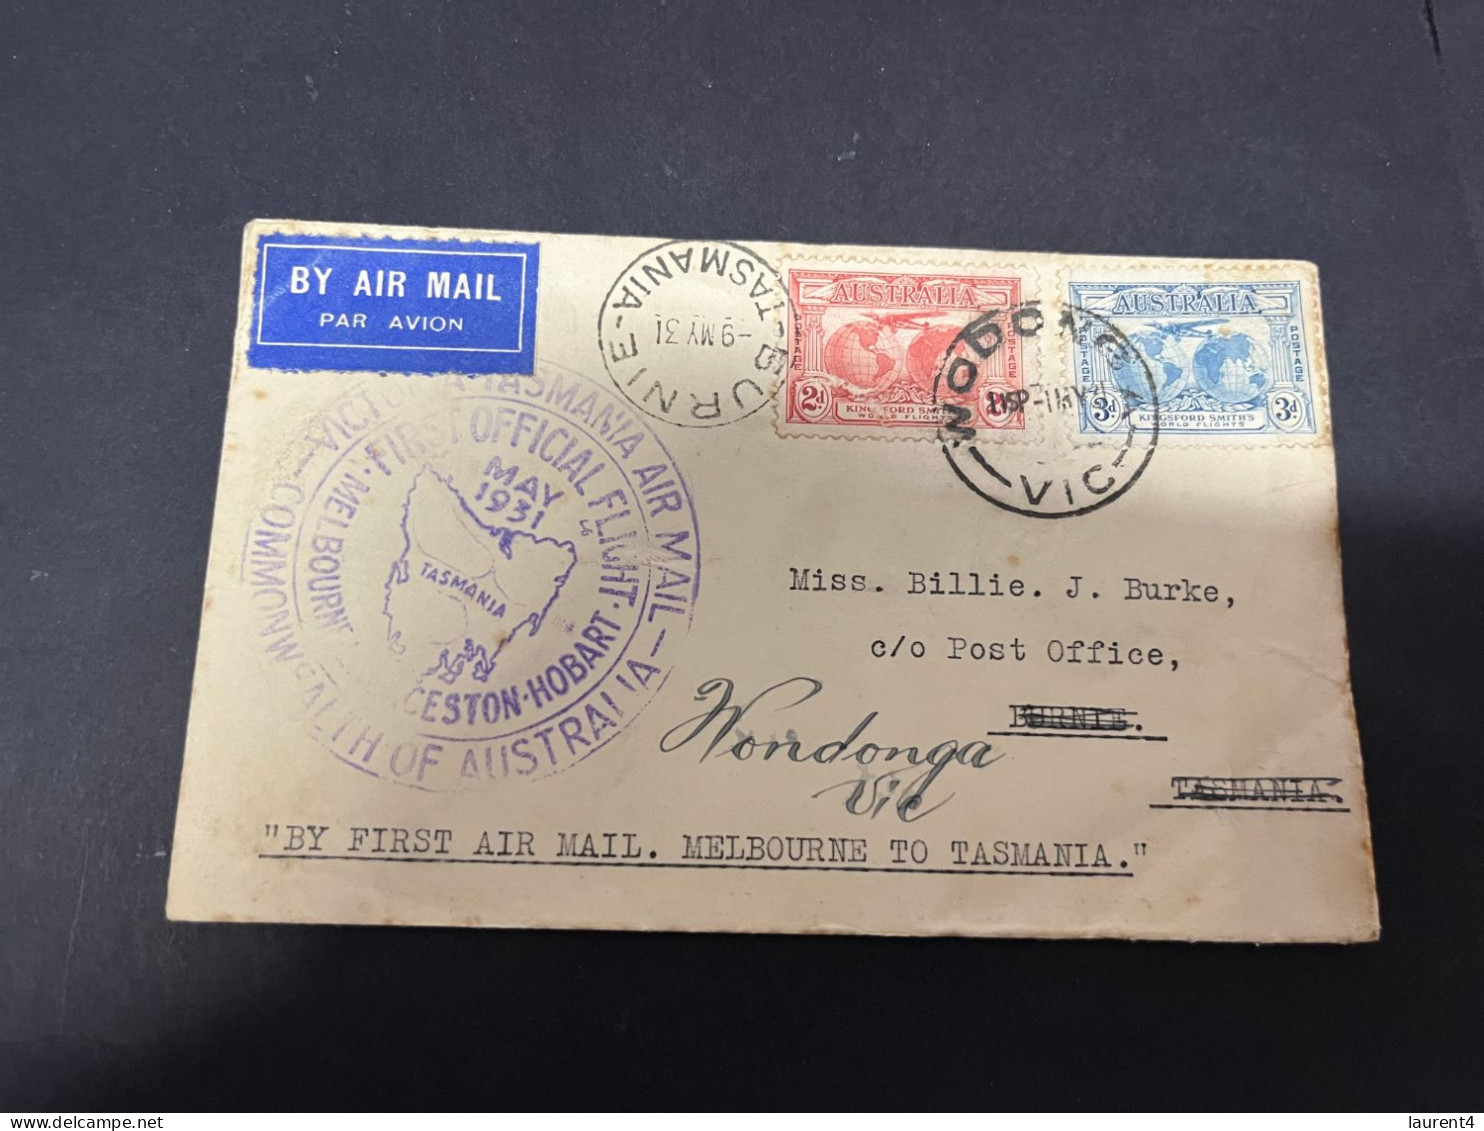 3-3-2024 (2 Y 3) Posted 1931 - First Air Mail From Melbourne To Tasmania (within Australia) - AIR MAIL Letter - Primi Voli